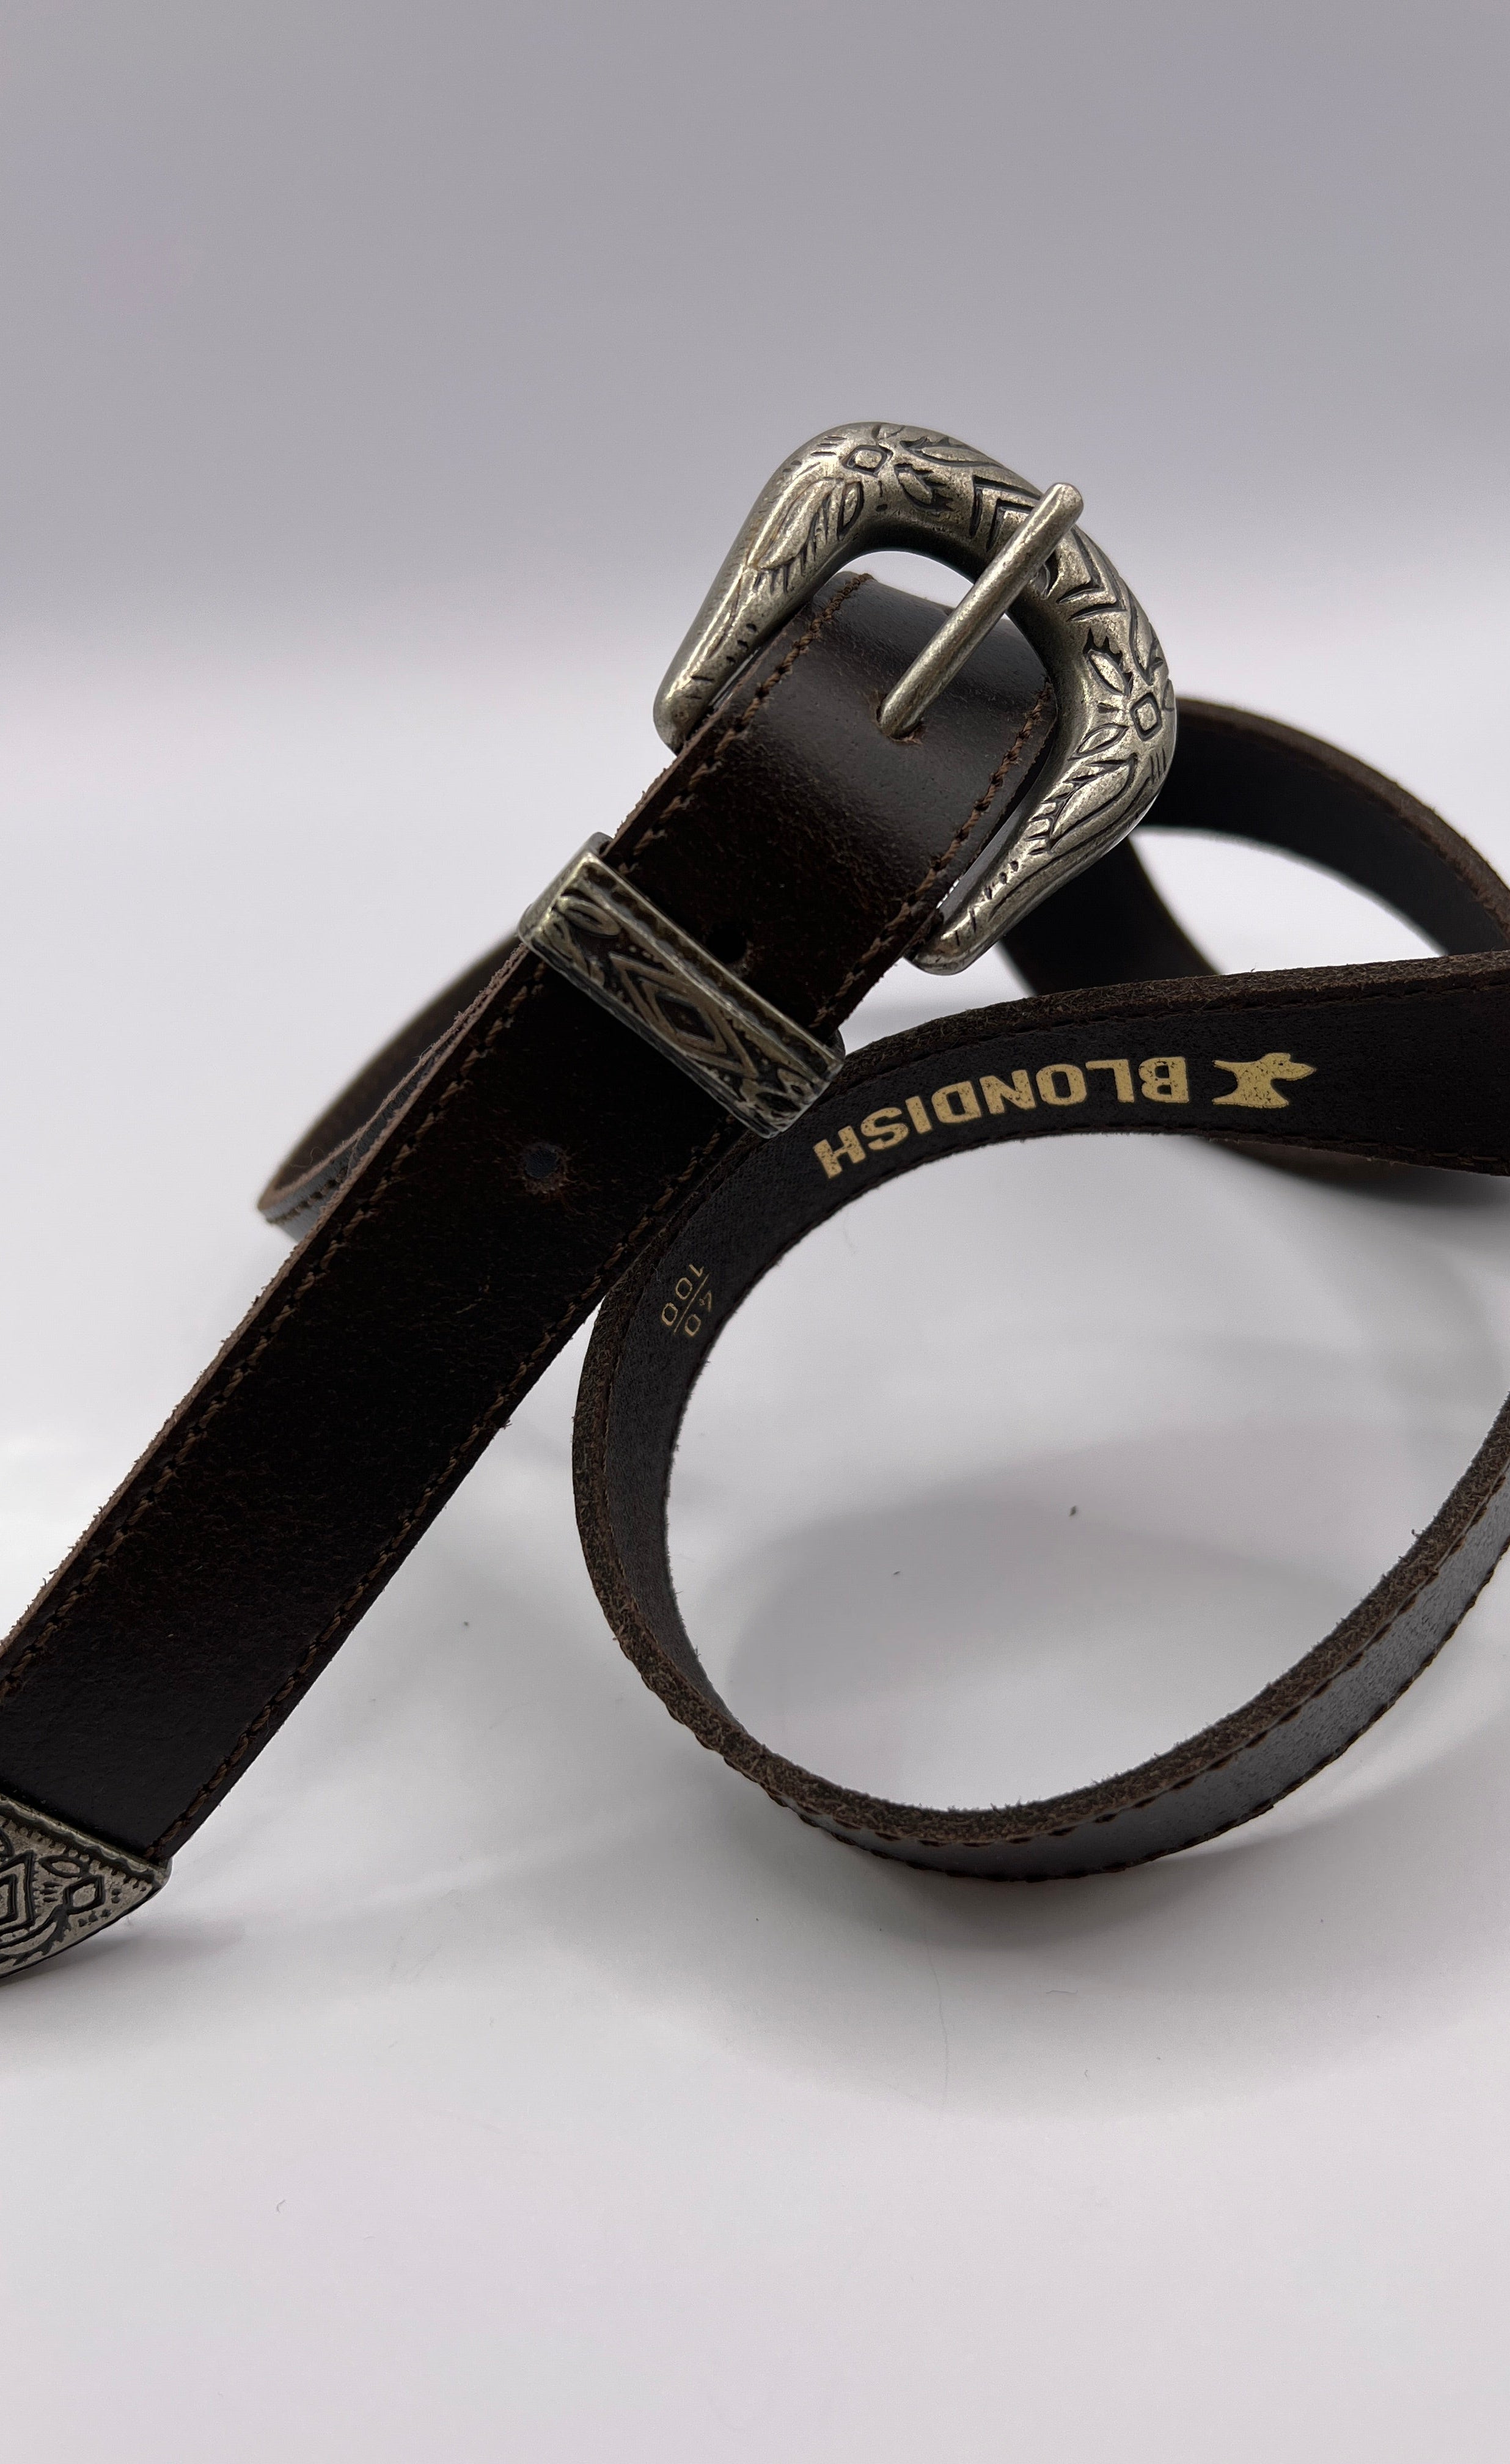 Cowboy Brown Leather Belt with Silver Adornment BLONDISH